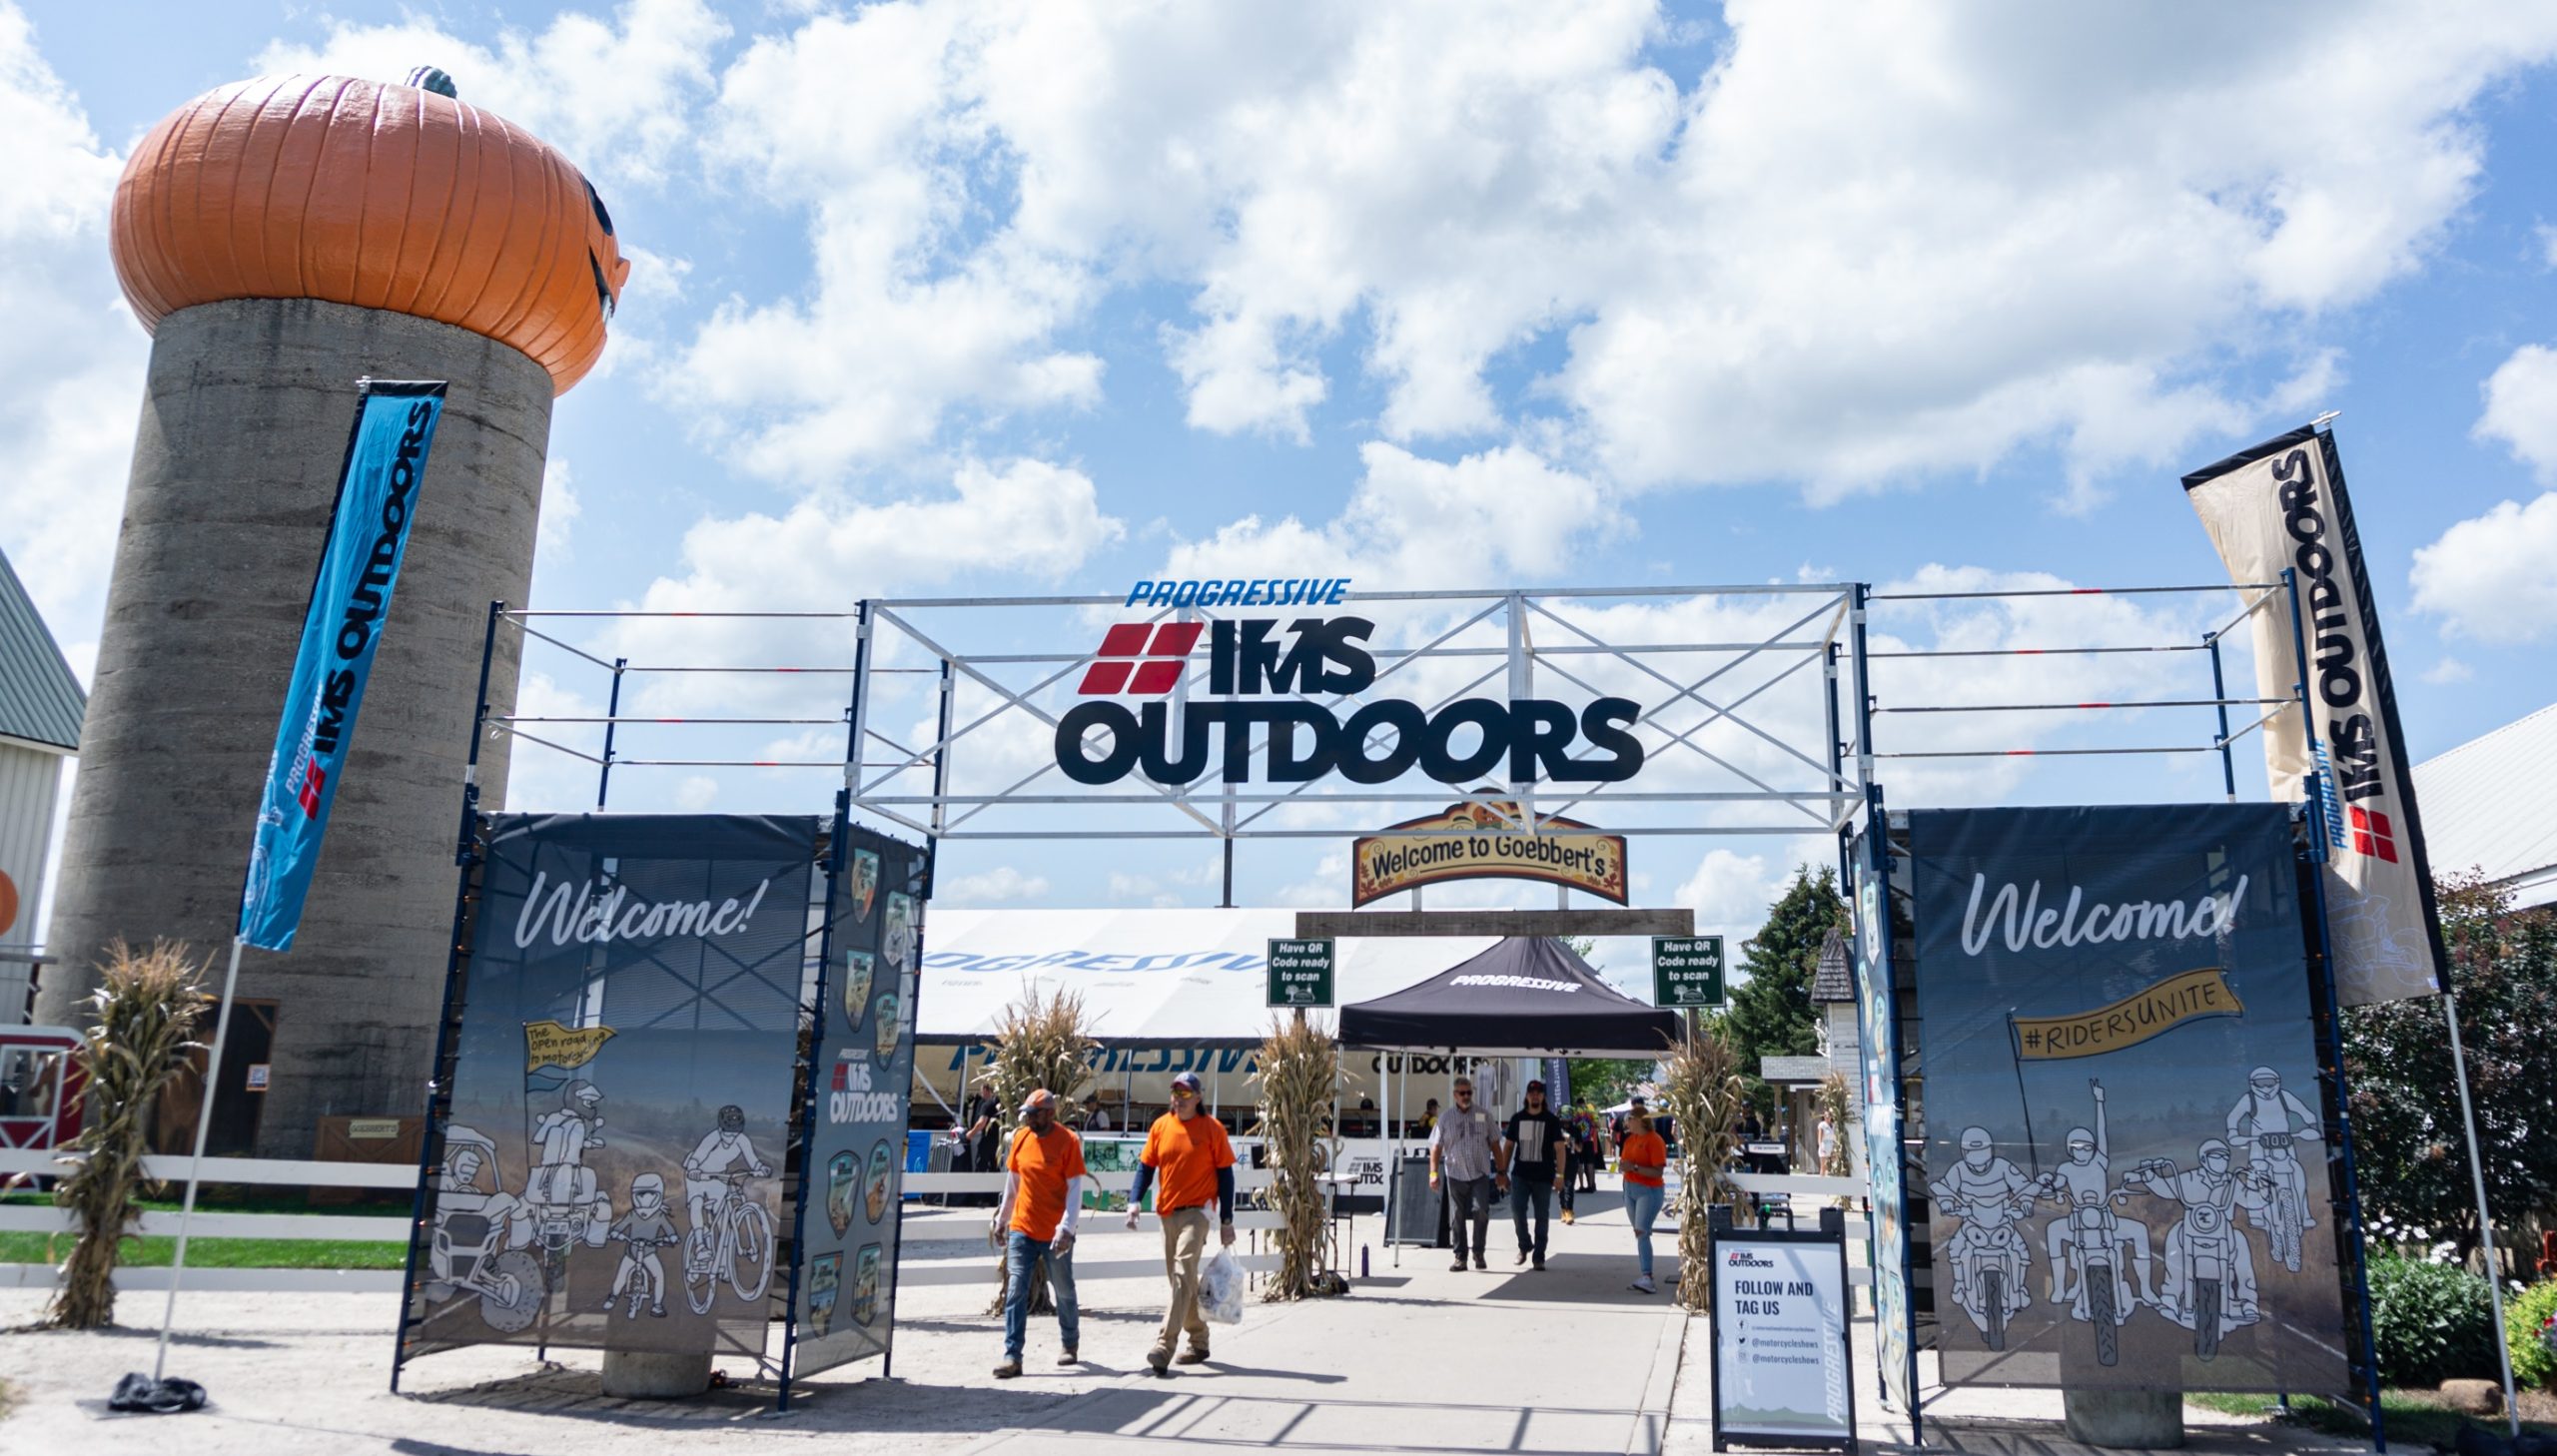 The entrance to the 2021 Progressive International Motorcycle Show Outdoors Chicago event